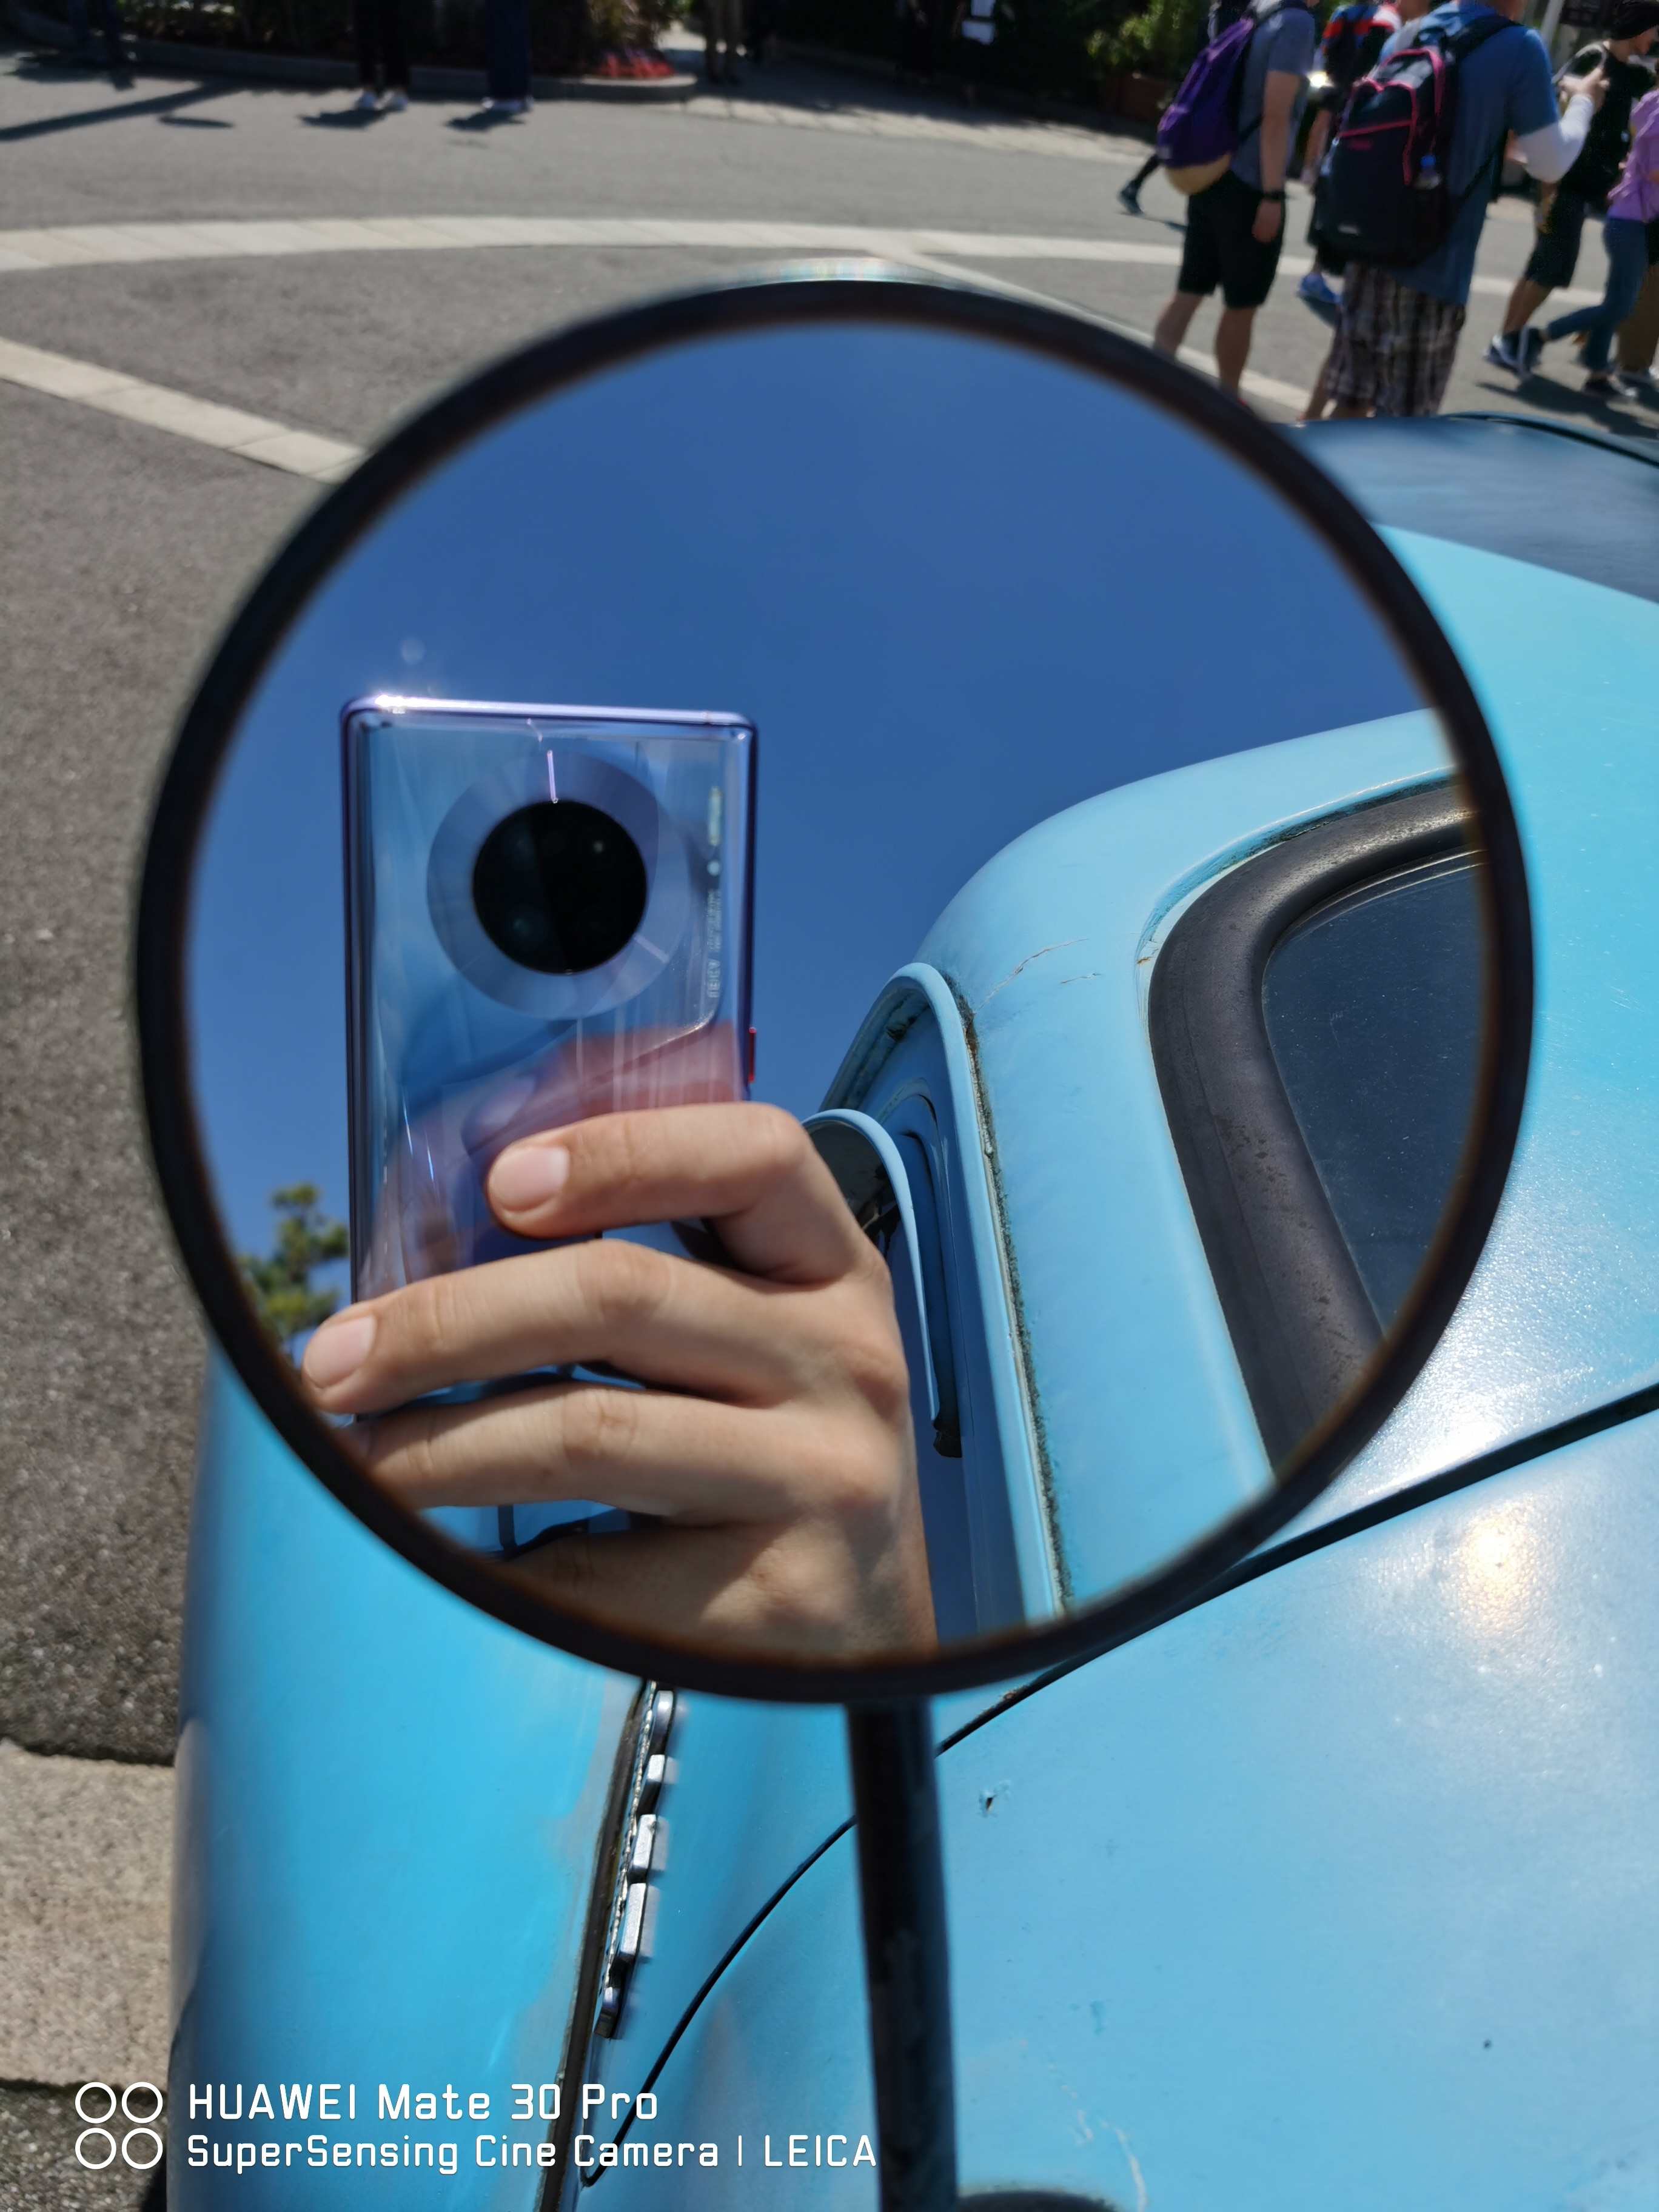 Huawei Mate 30 Pro review: This camera is also a phone 1